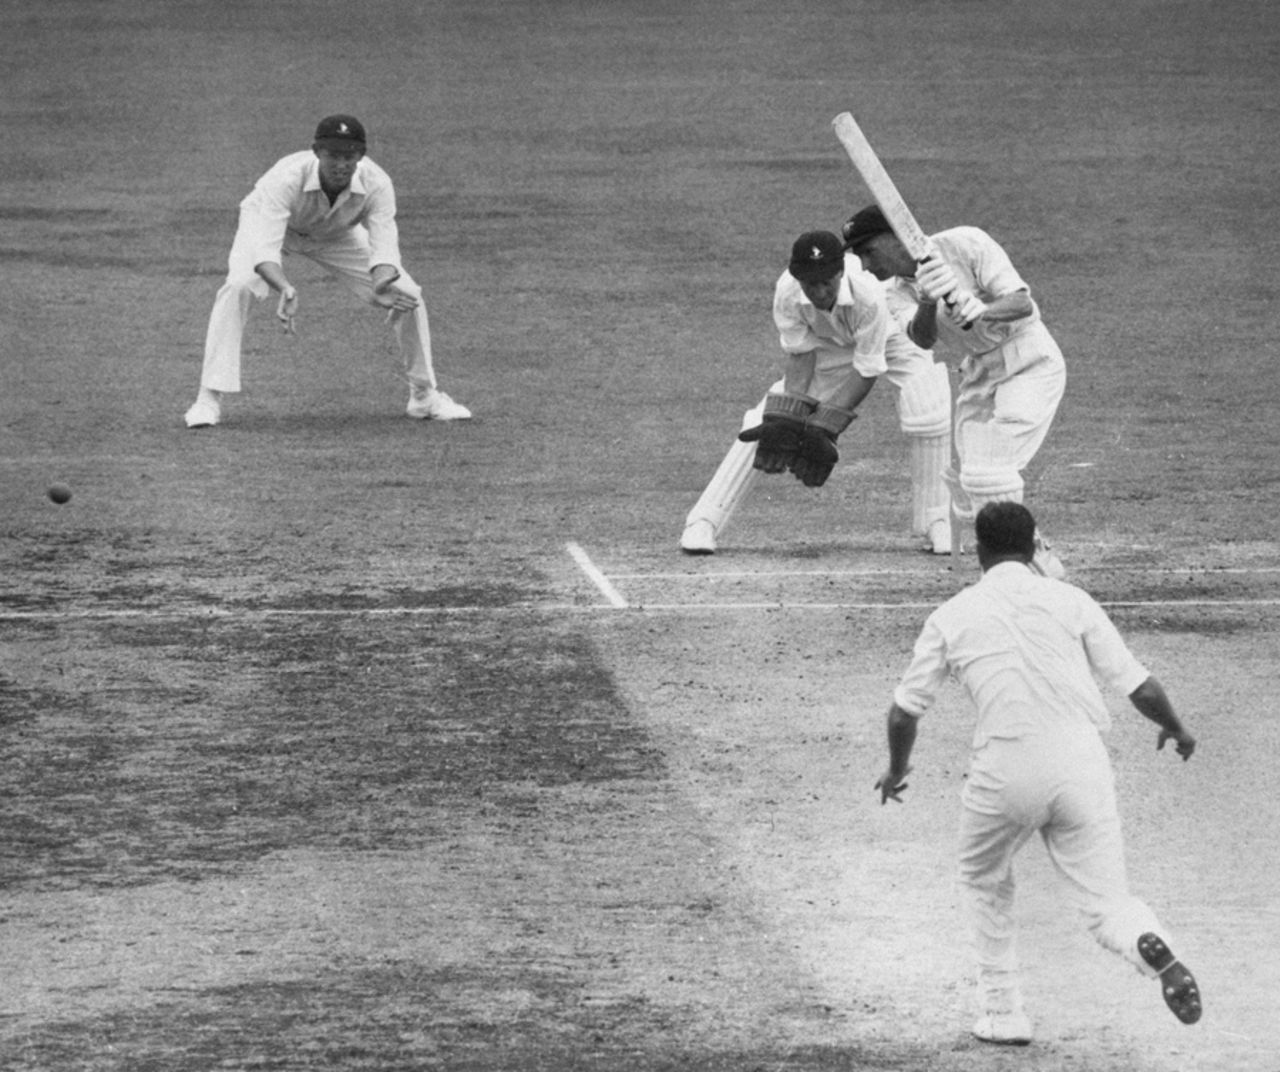 Brian Booth drives a ball off Trevor Goddard during his innings of 169, Australia v South Africa, 1st Test, Brisbane, December 6, 1963